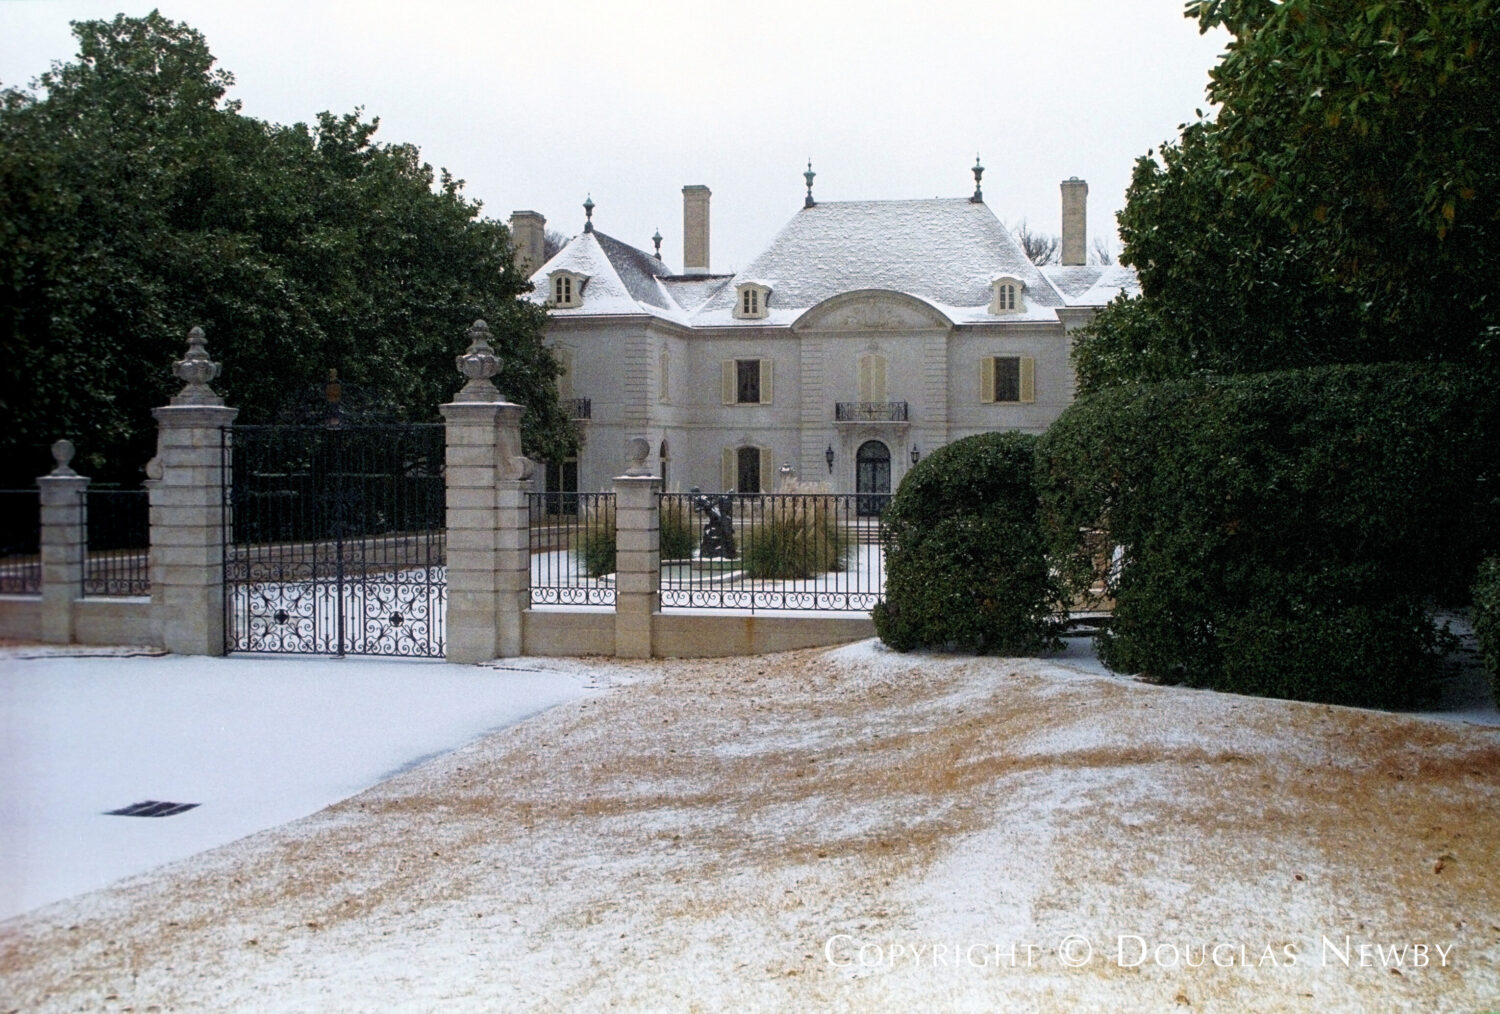 It had just snowed when I took my first picture of the Crespi Estate. This is the photograph I showed Cinda Hicks to let her know about the property. She and her husband Tom Hicks were identified by Tom Foster in his Texas Monthly article as the original owners of the Crespi Estate.